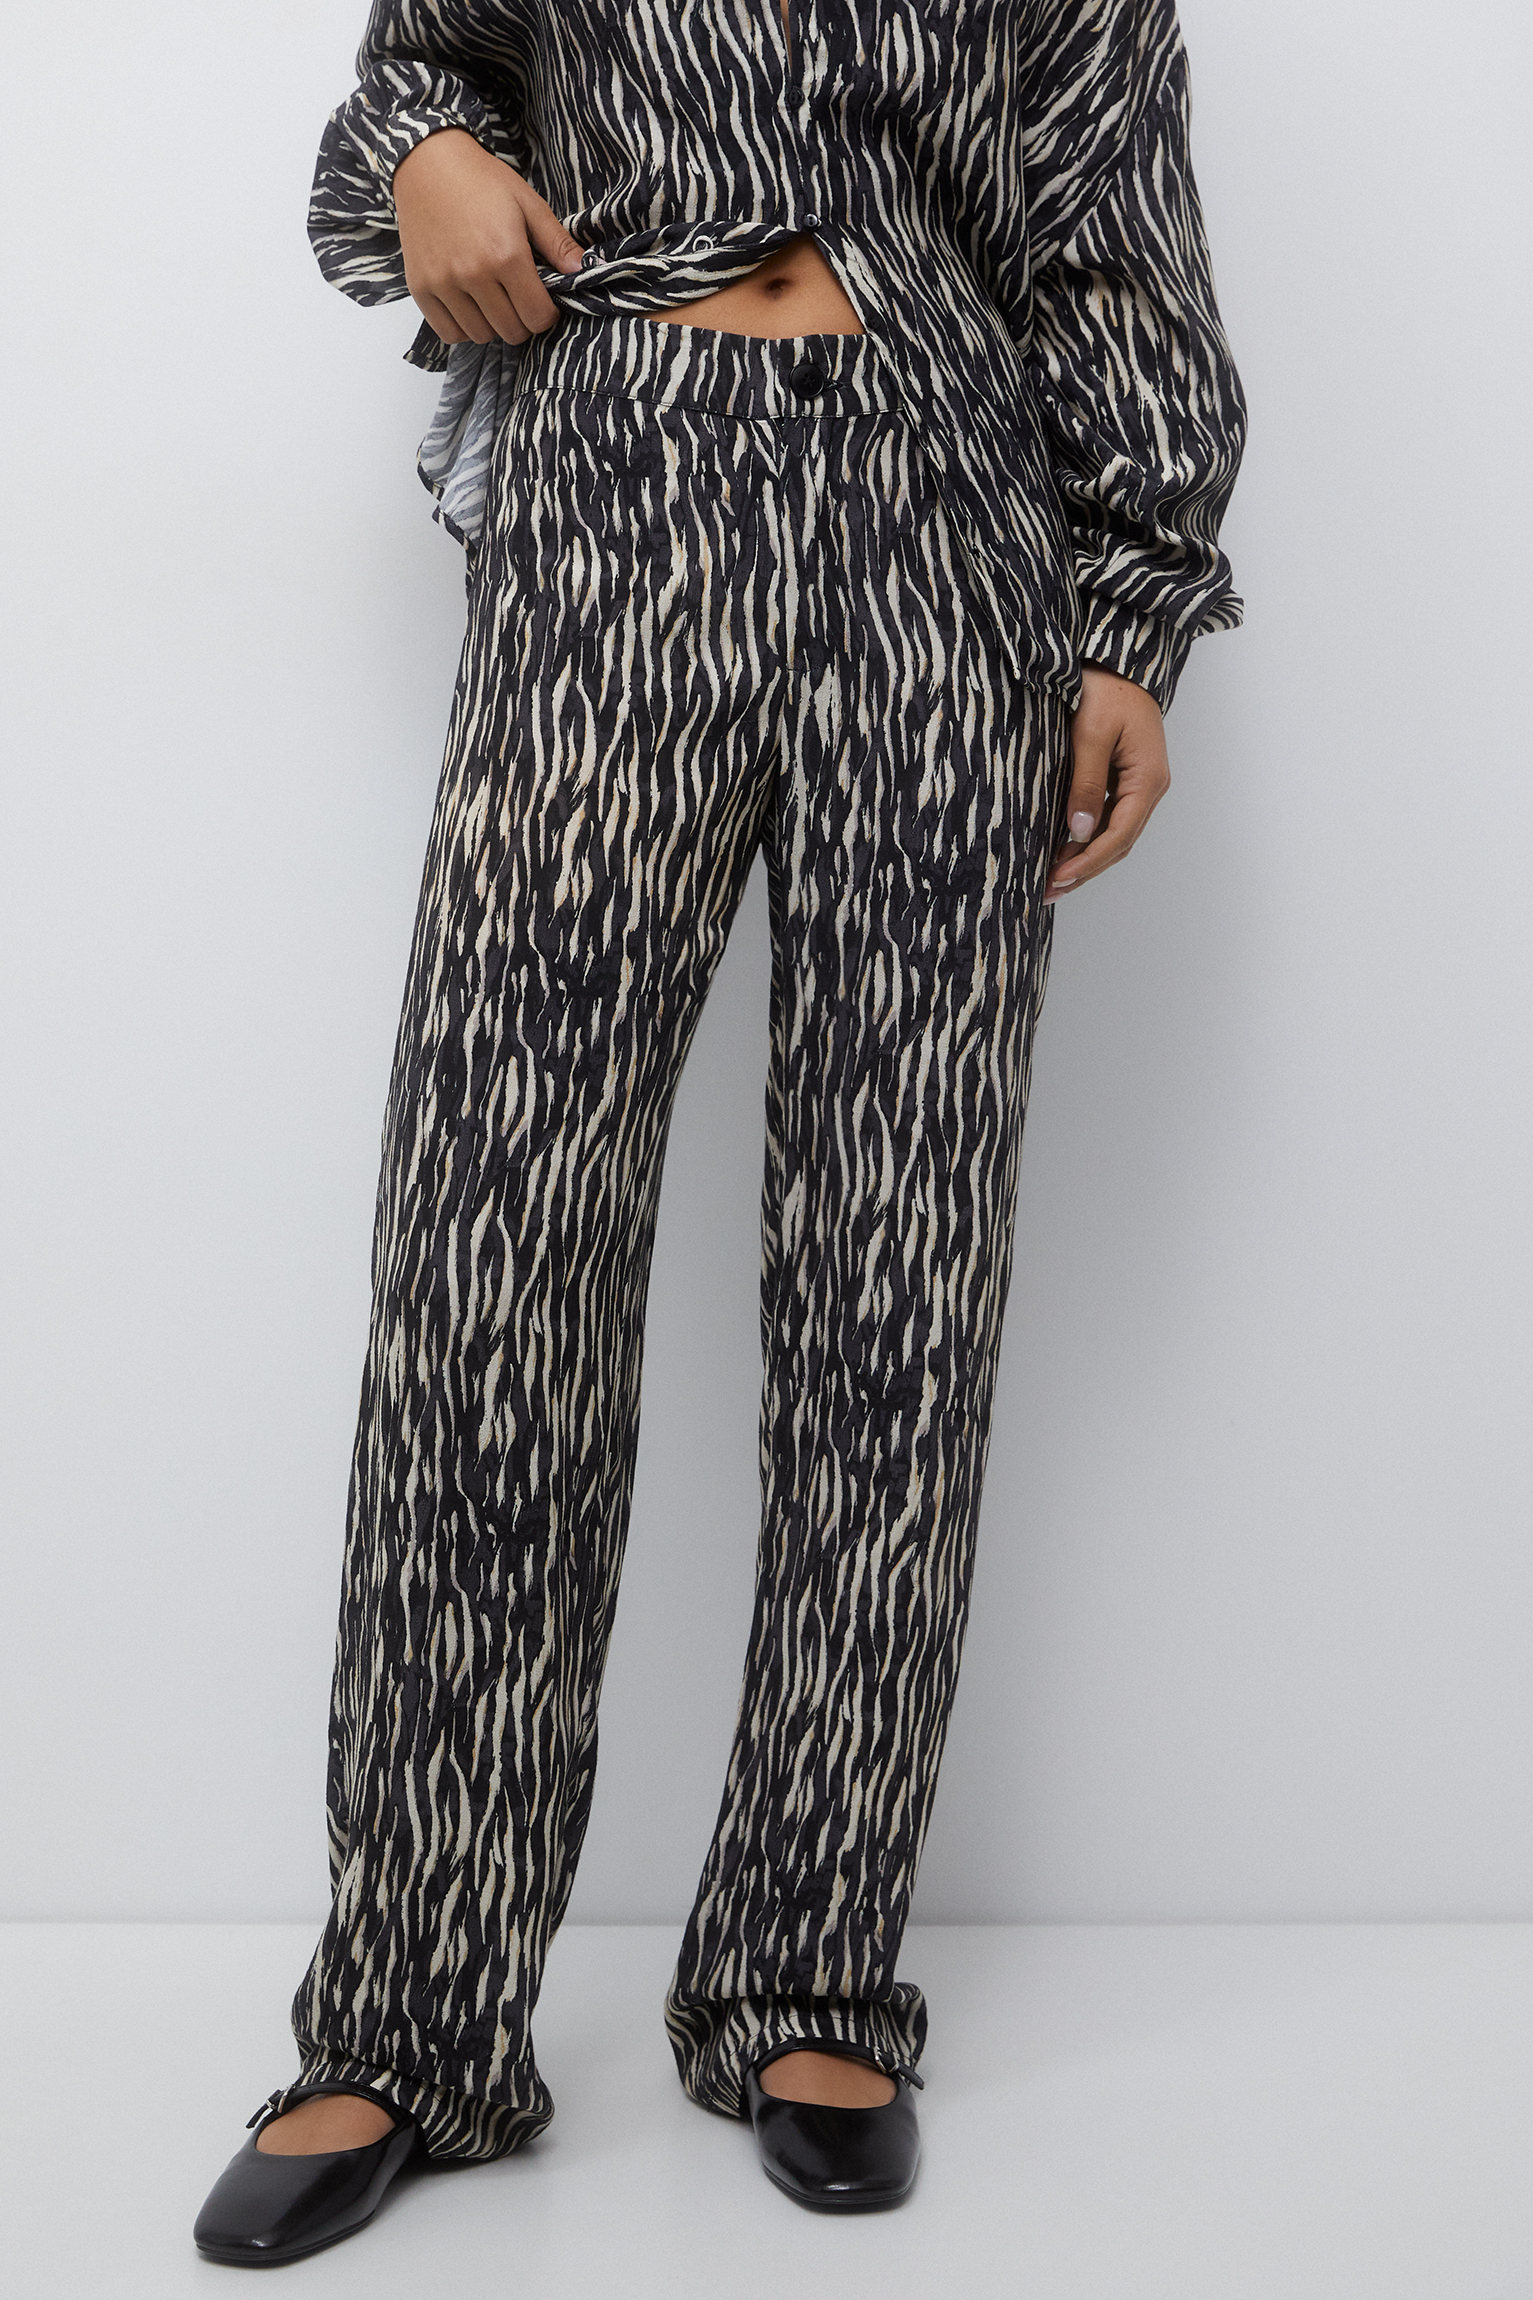 Flowing animal print trousers - PULL&BEAR